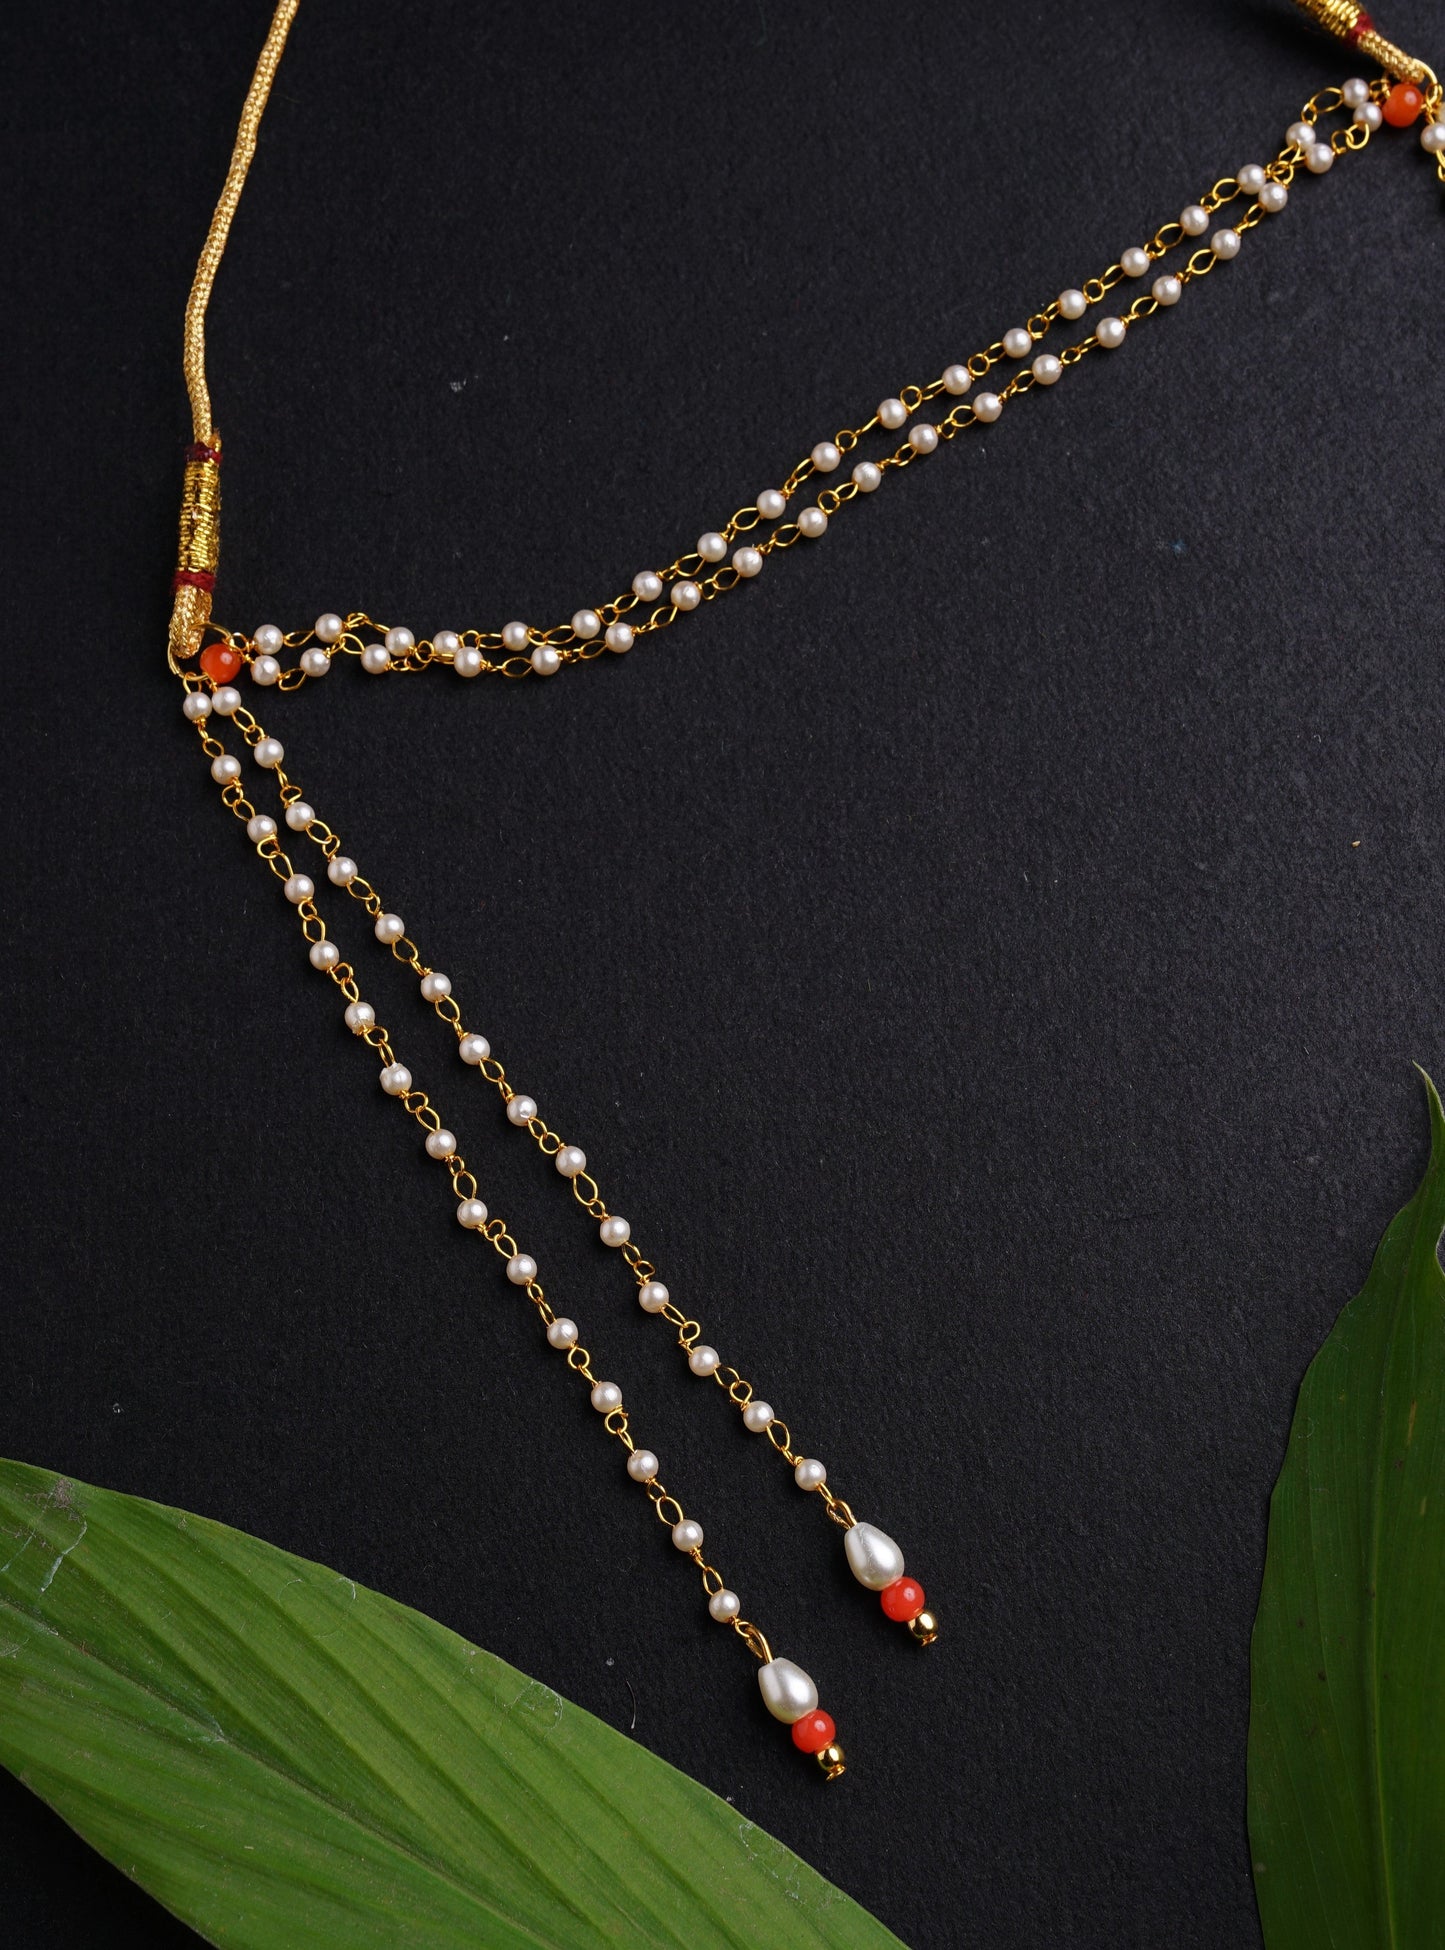 Mundavalya is a forehead ornament worn by Batu for Vratabandh/Munj/Upnayan/ Thread Ceremony. Mundavalya,kanthi,bhikbali,topi,pagdi are boys accessories exclusively designed using Pearls,glass beads,jadau & gold plated findings for Batu,for Upanayan/Vratabandha/munj /thread ceremony. 